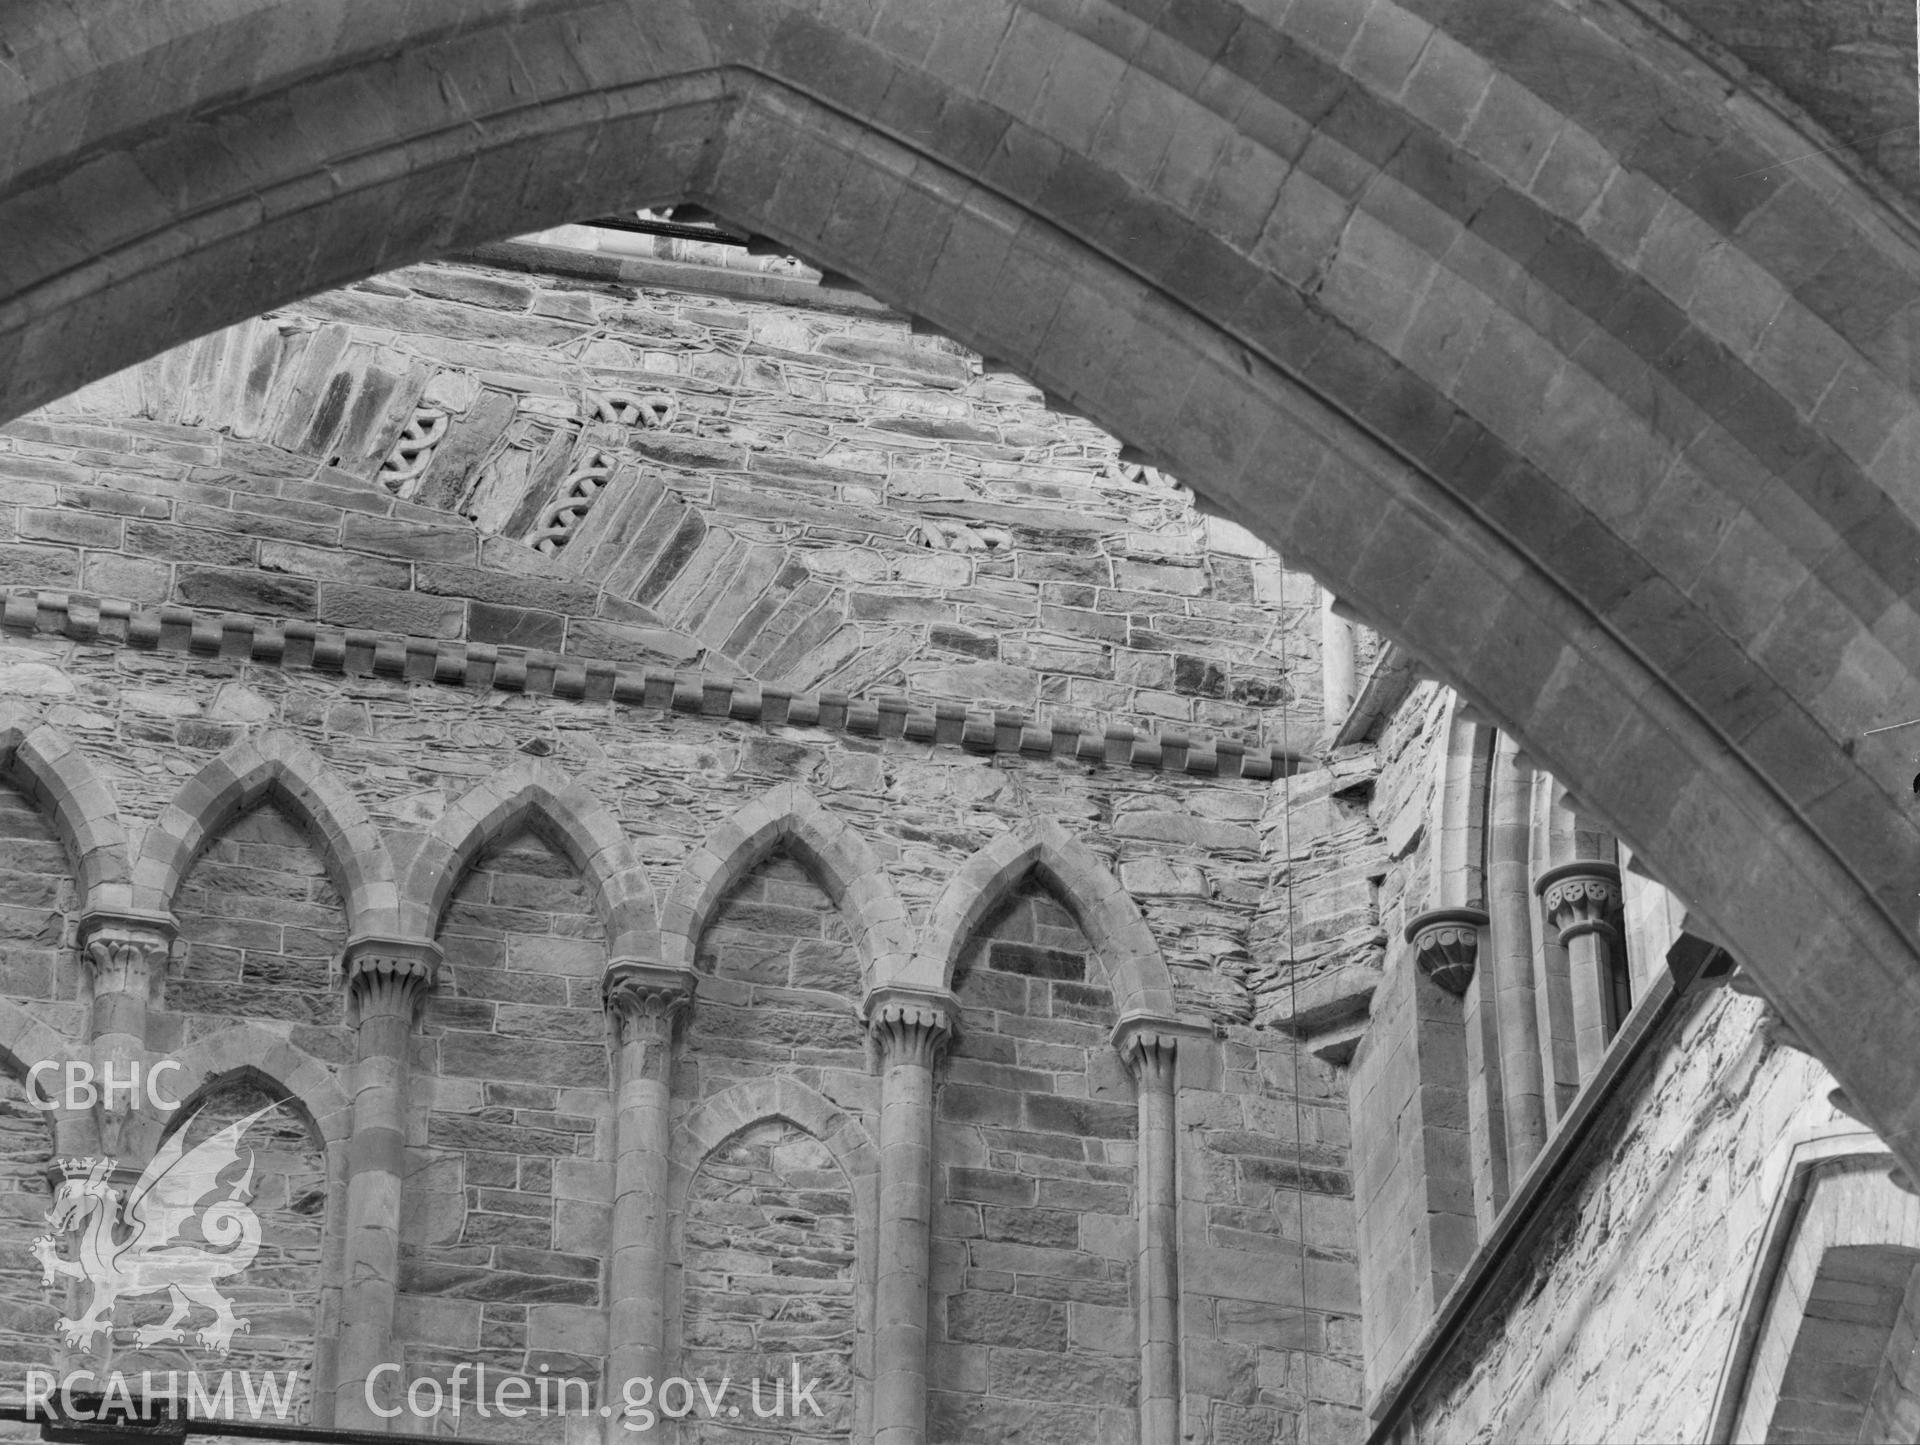 Digital copy of a black and white nitrate negative showing detailed view of arcaded wall through arch at St. David's Cathedral, taken by E.W. Lovegrove, July 1936.